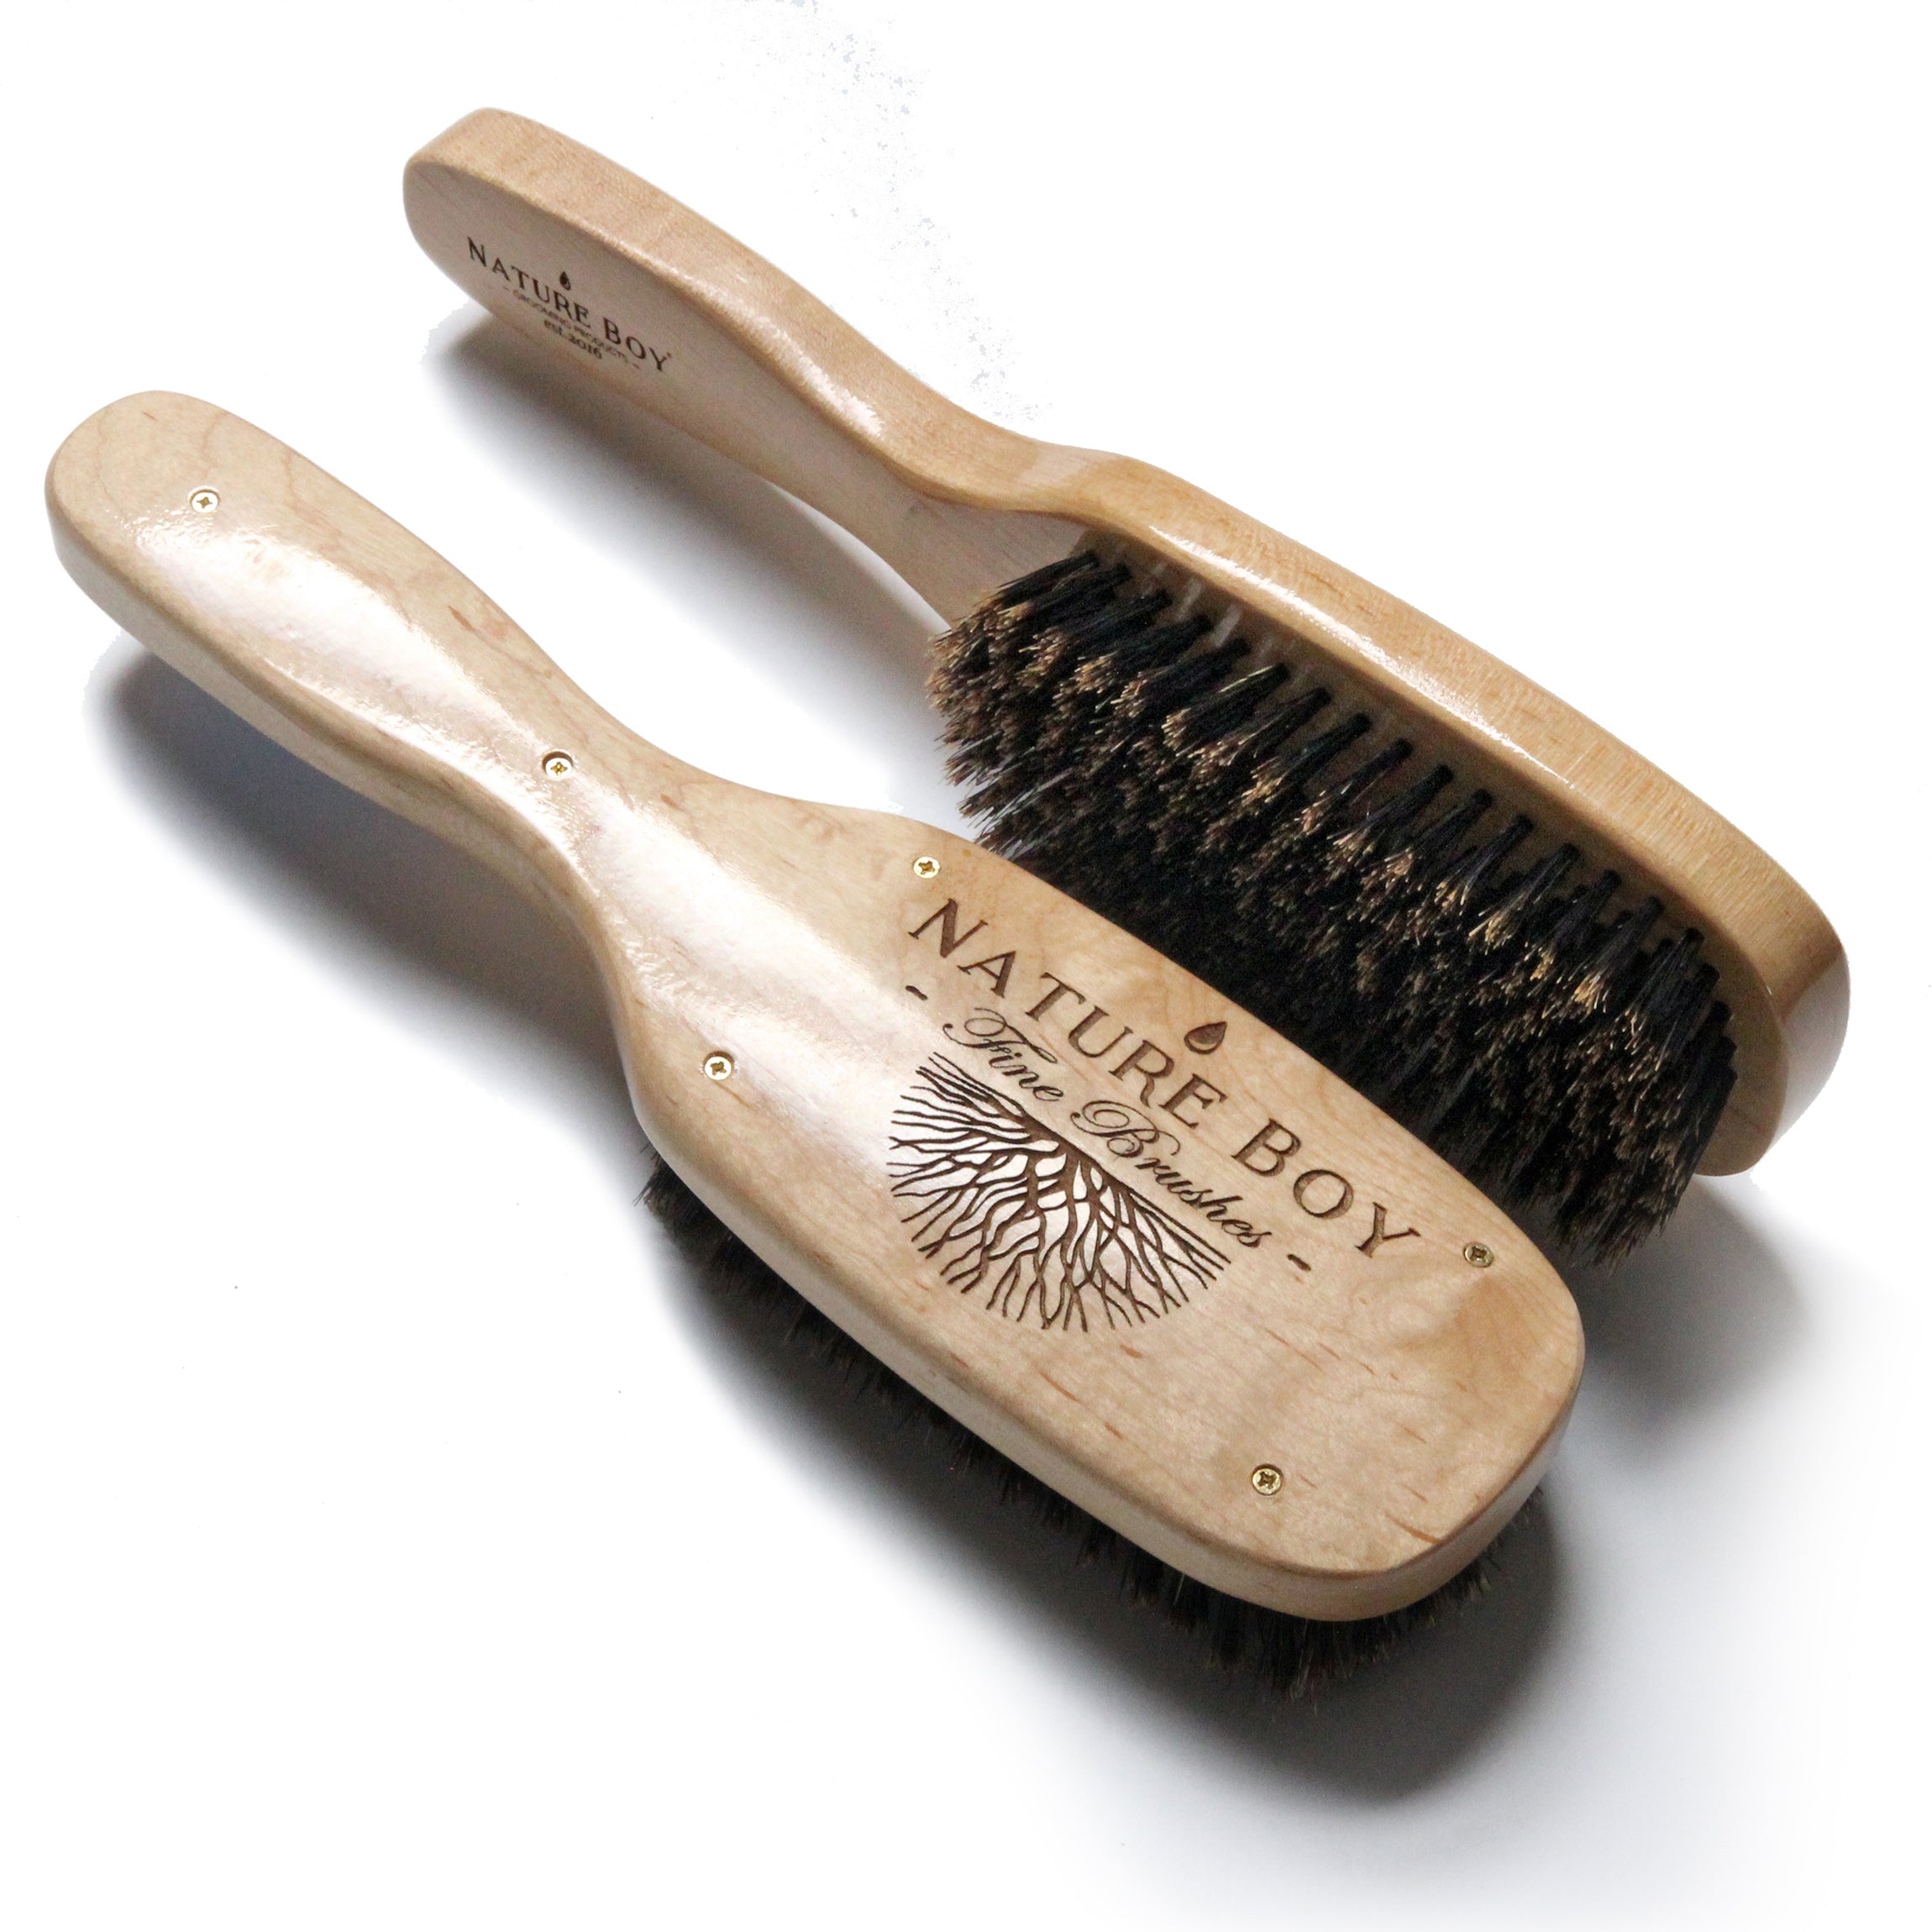 nature boy grooming products long handle boar bristle hair wave brush medium soft maple wood 100% natural